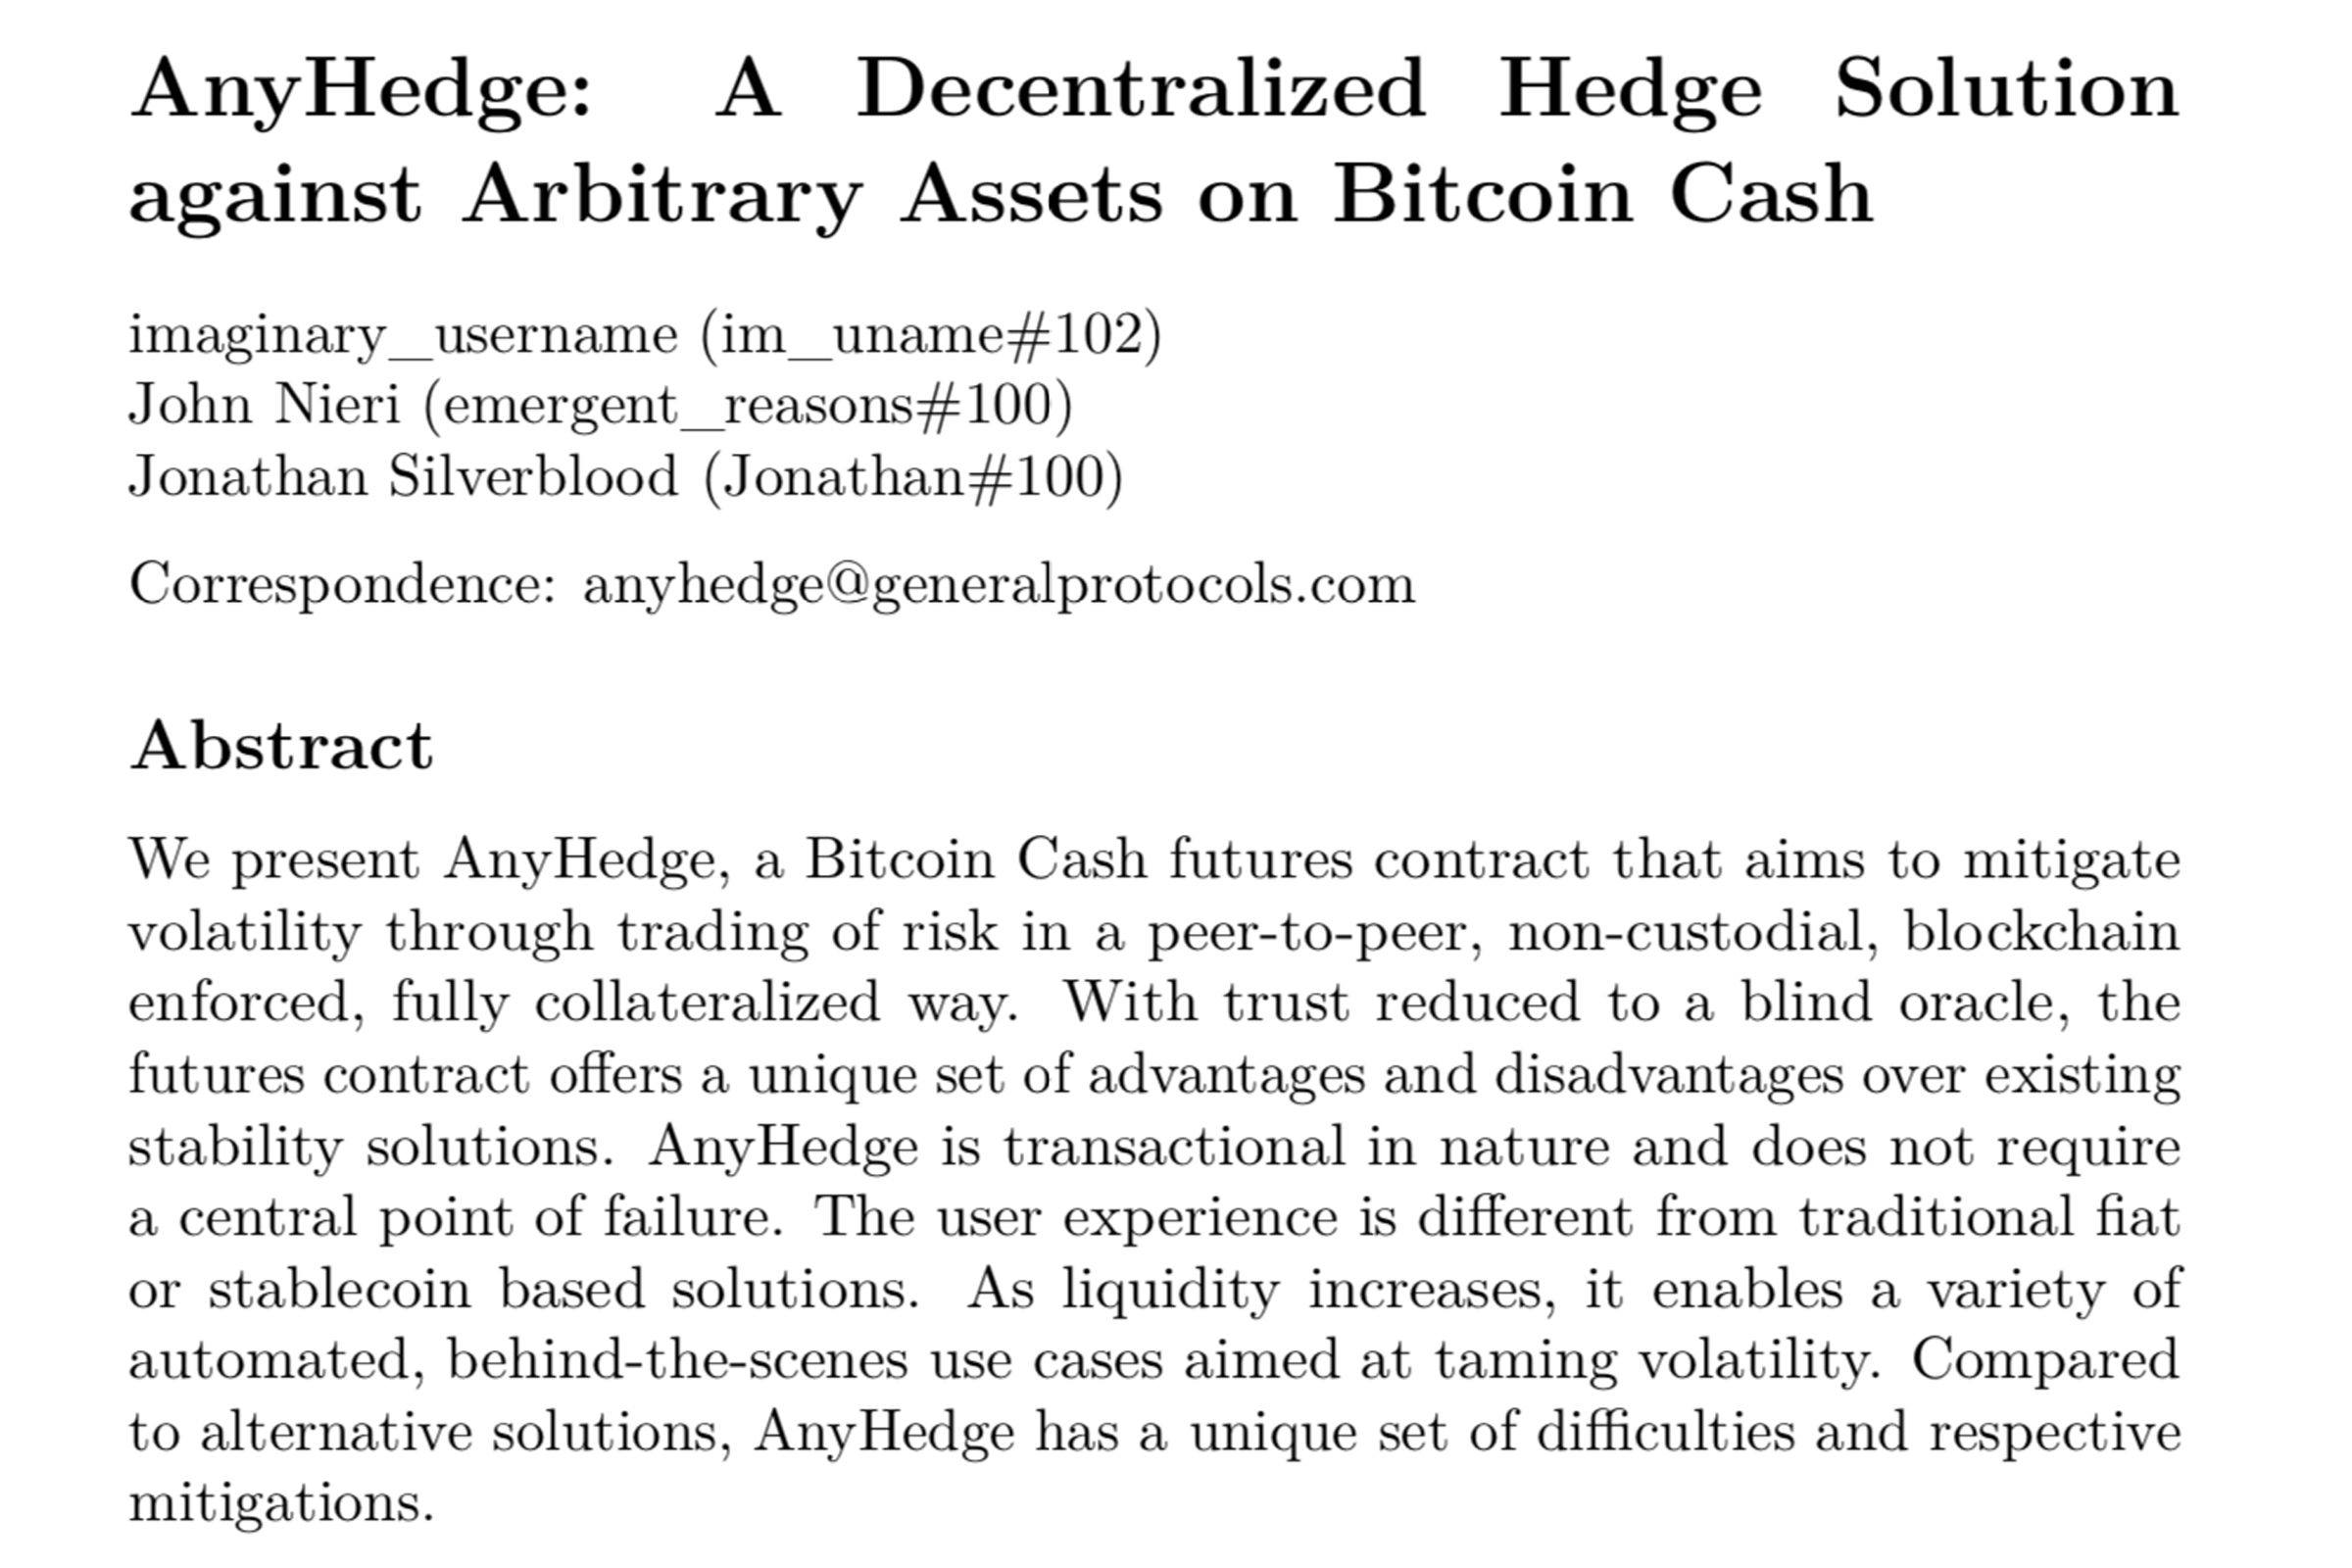 Anyhedge to Launch Blockchain-Enforced Synthetic Derivatives for Bitcoin Cash